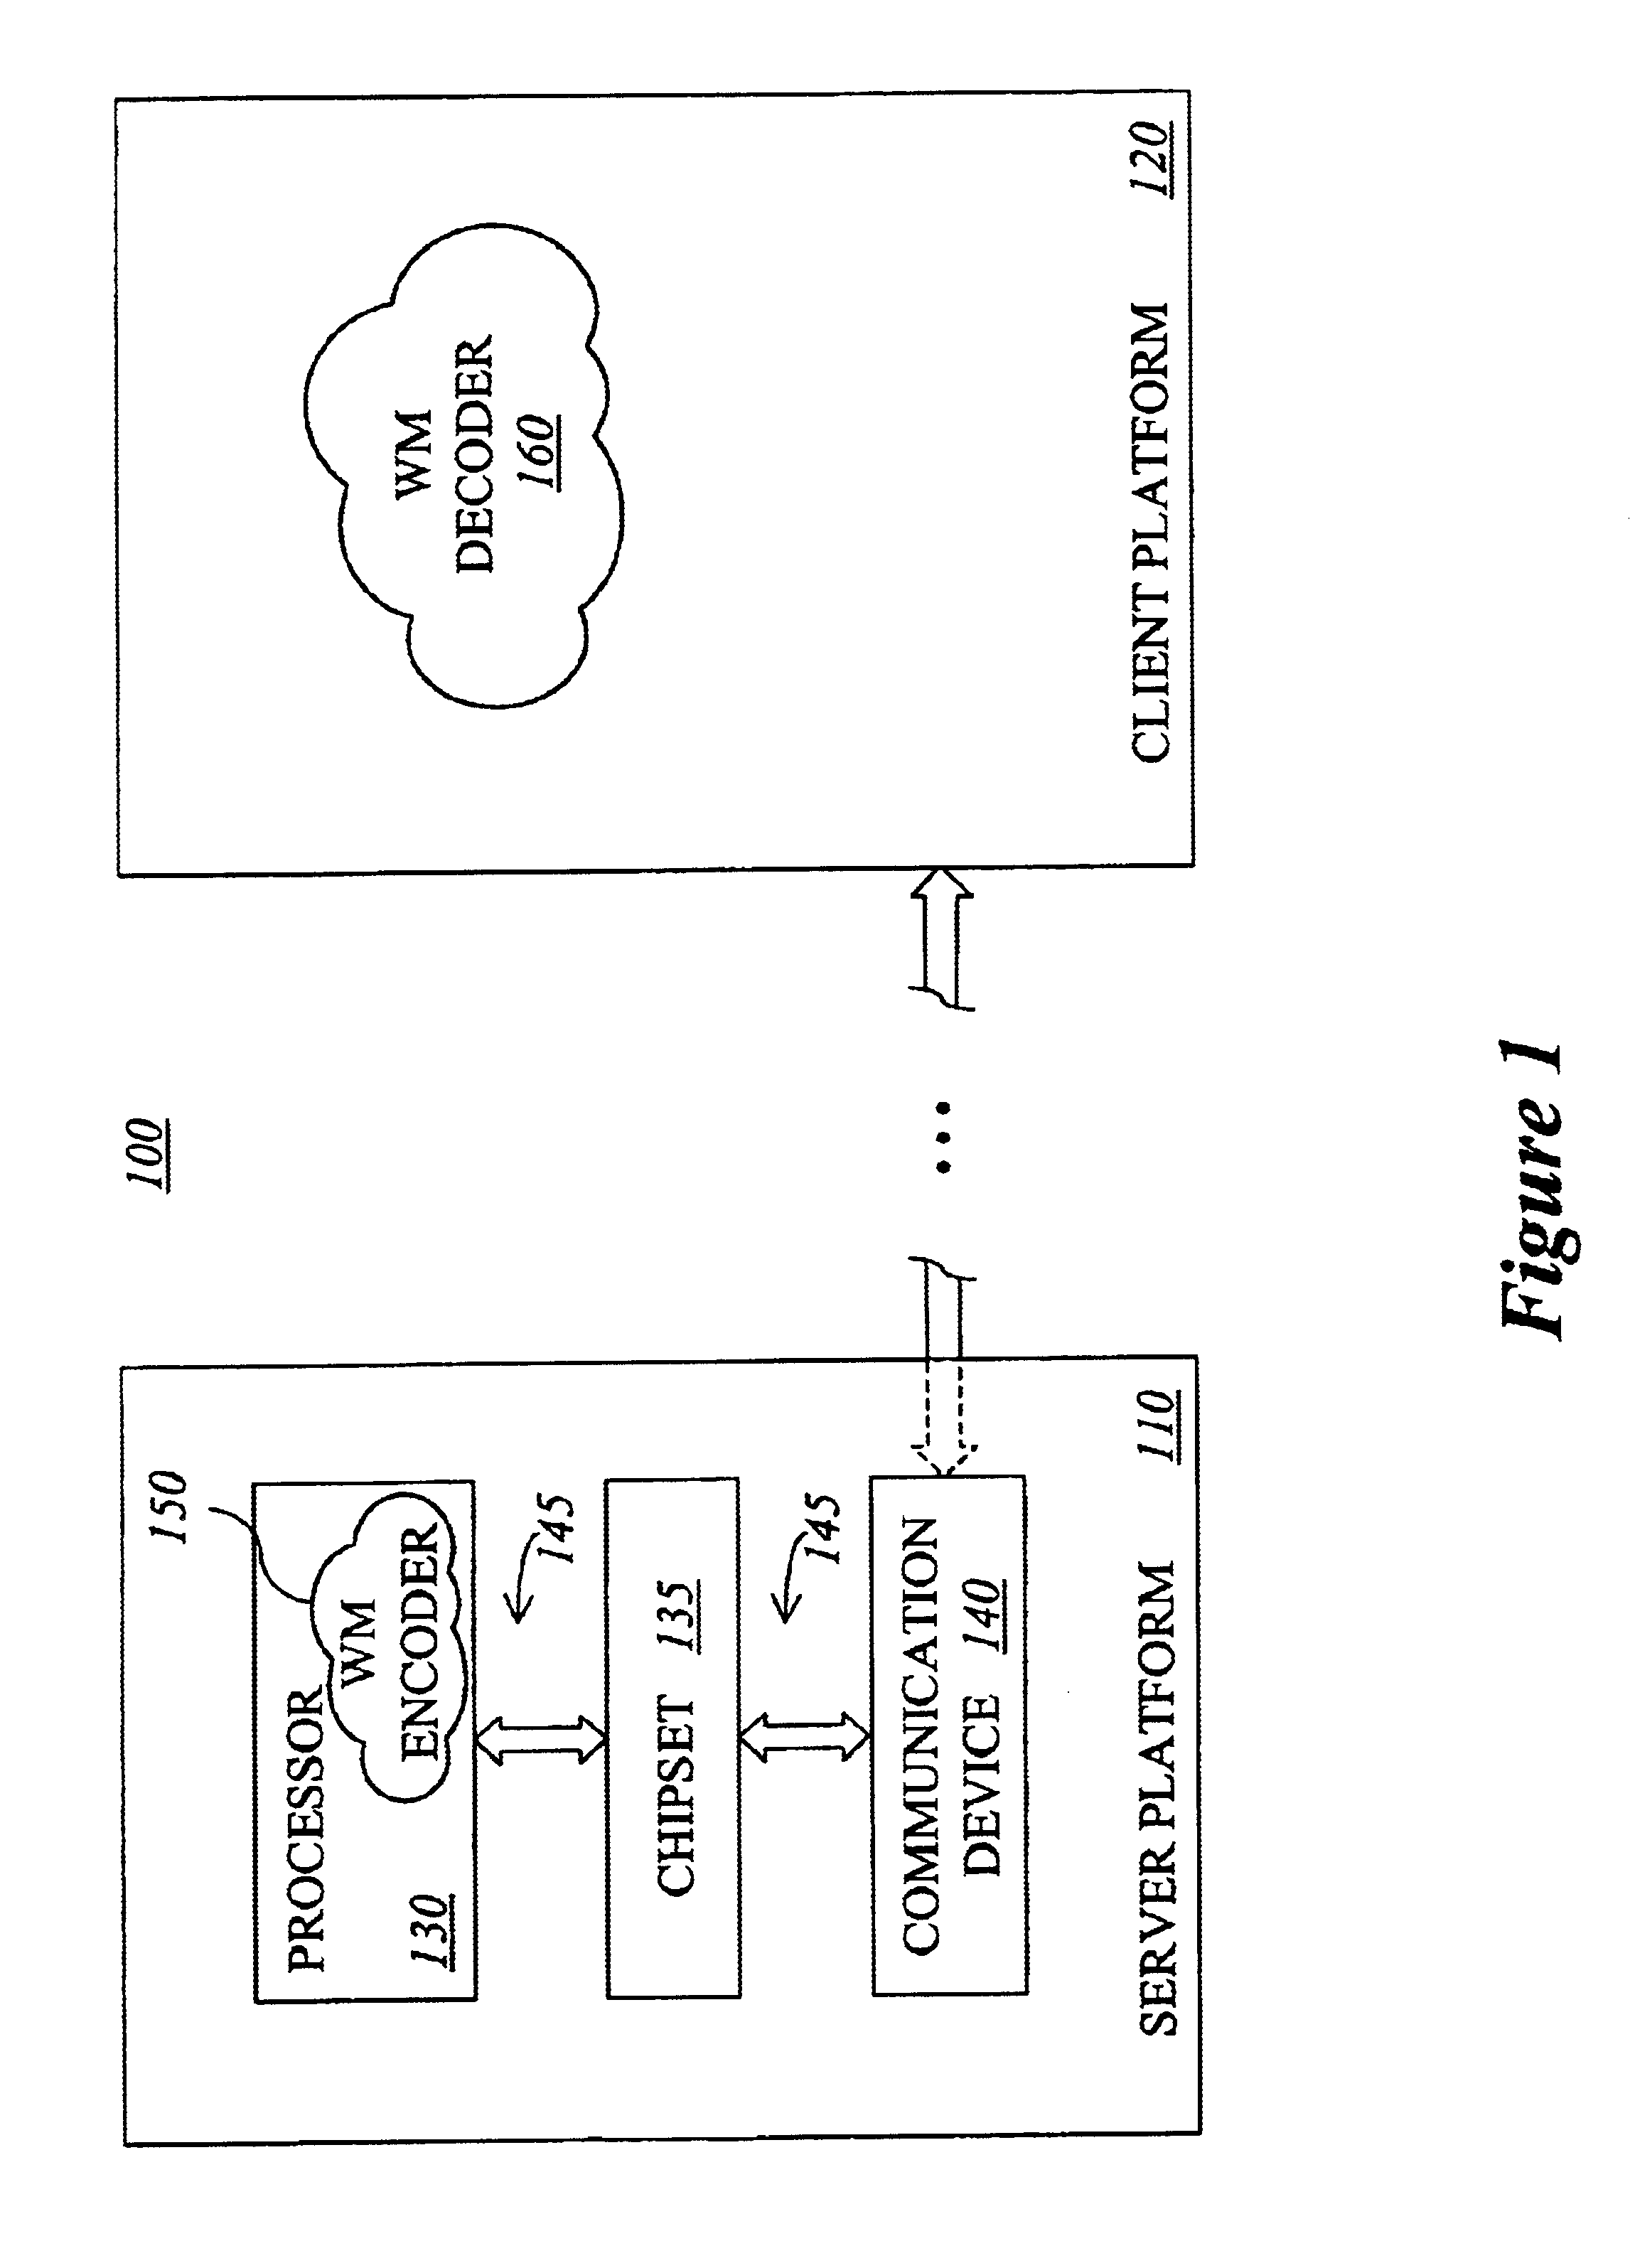 Method for robust watermarking of content